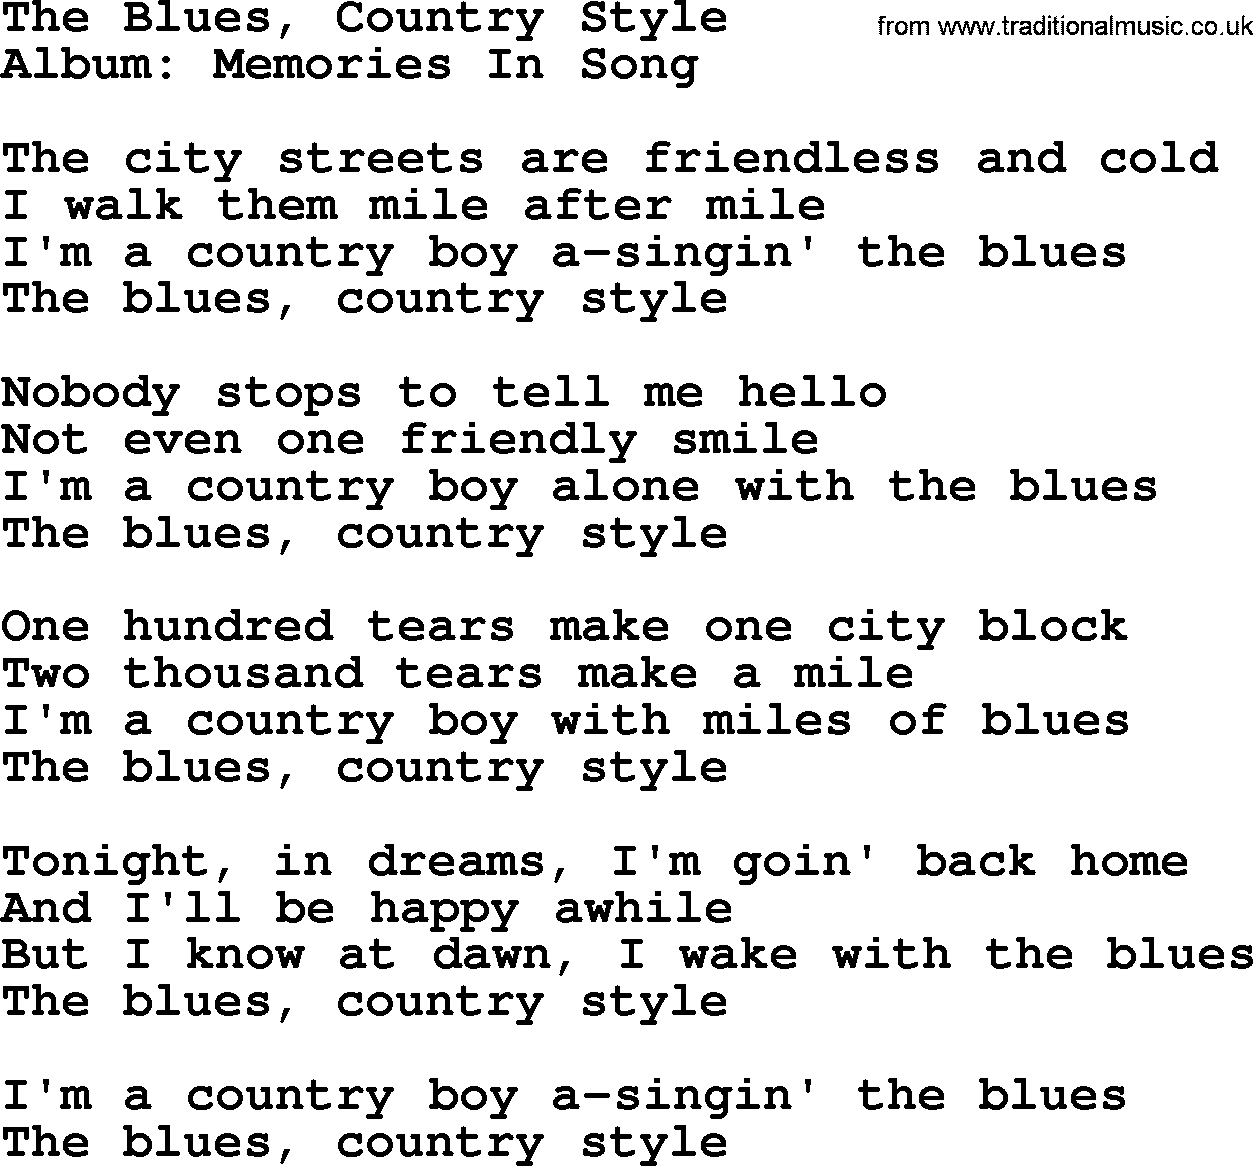 Marty Robbins song: The Blues Country Style, lyrics